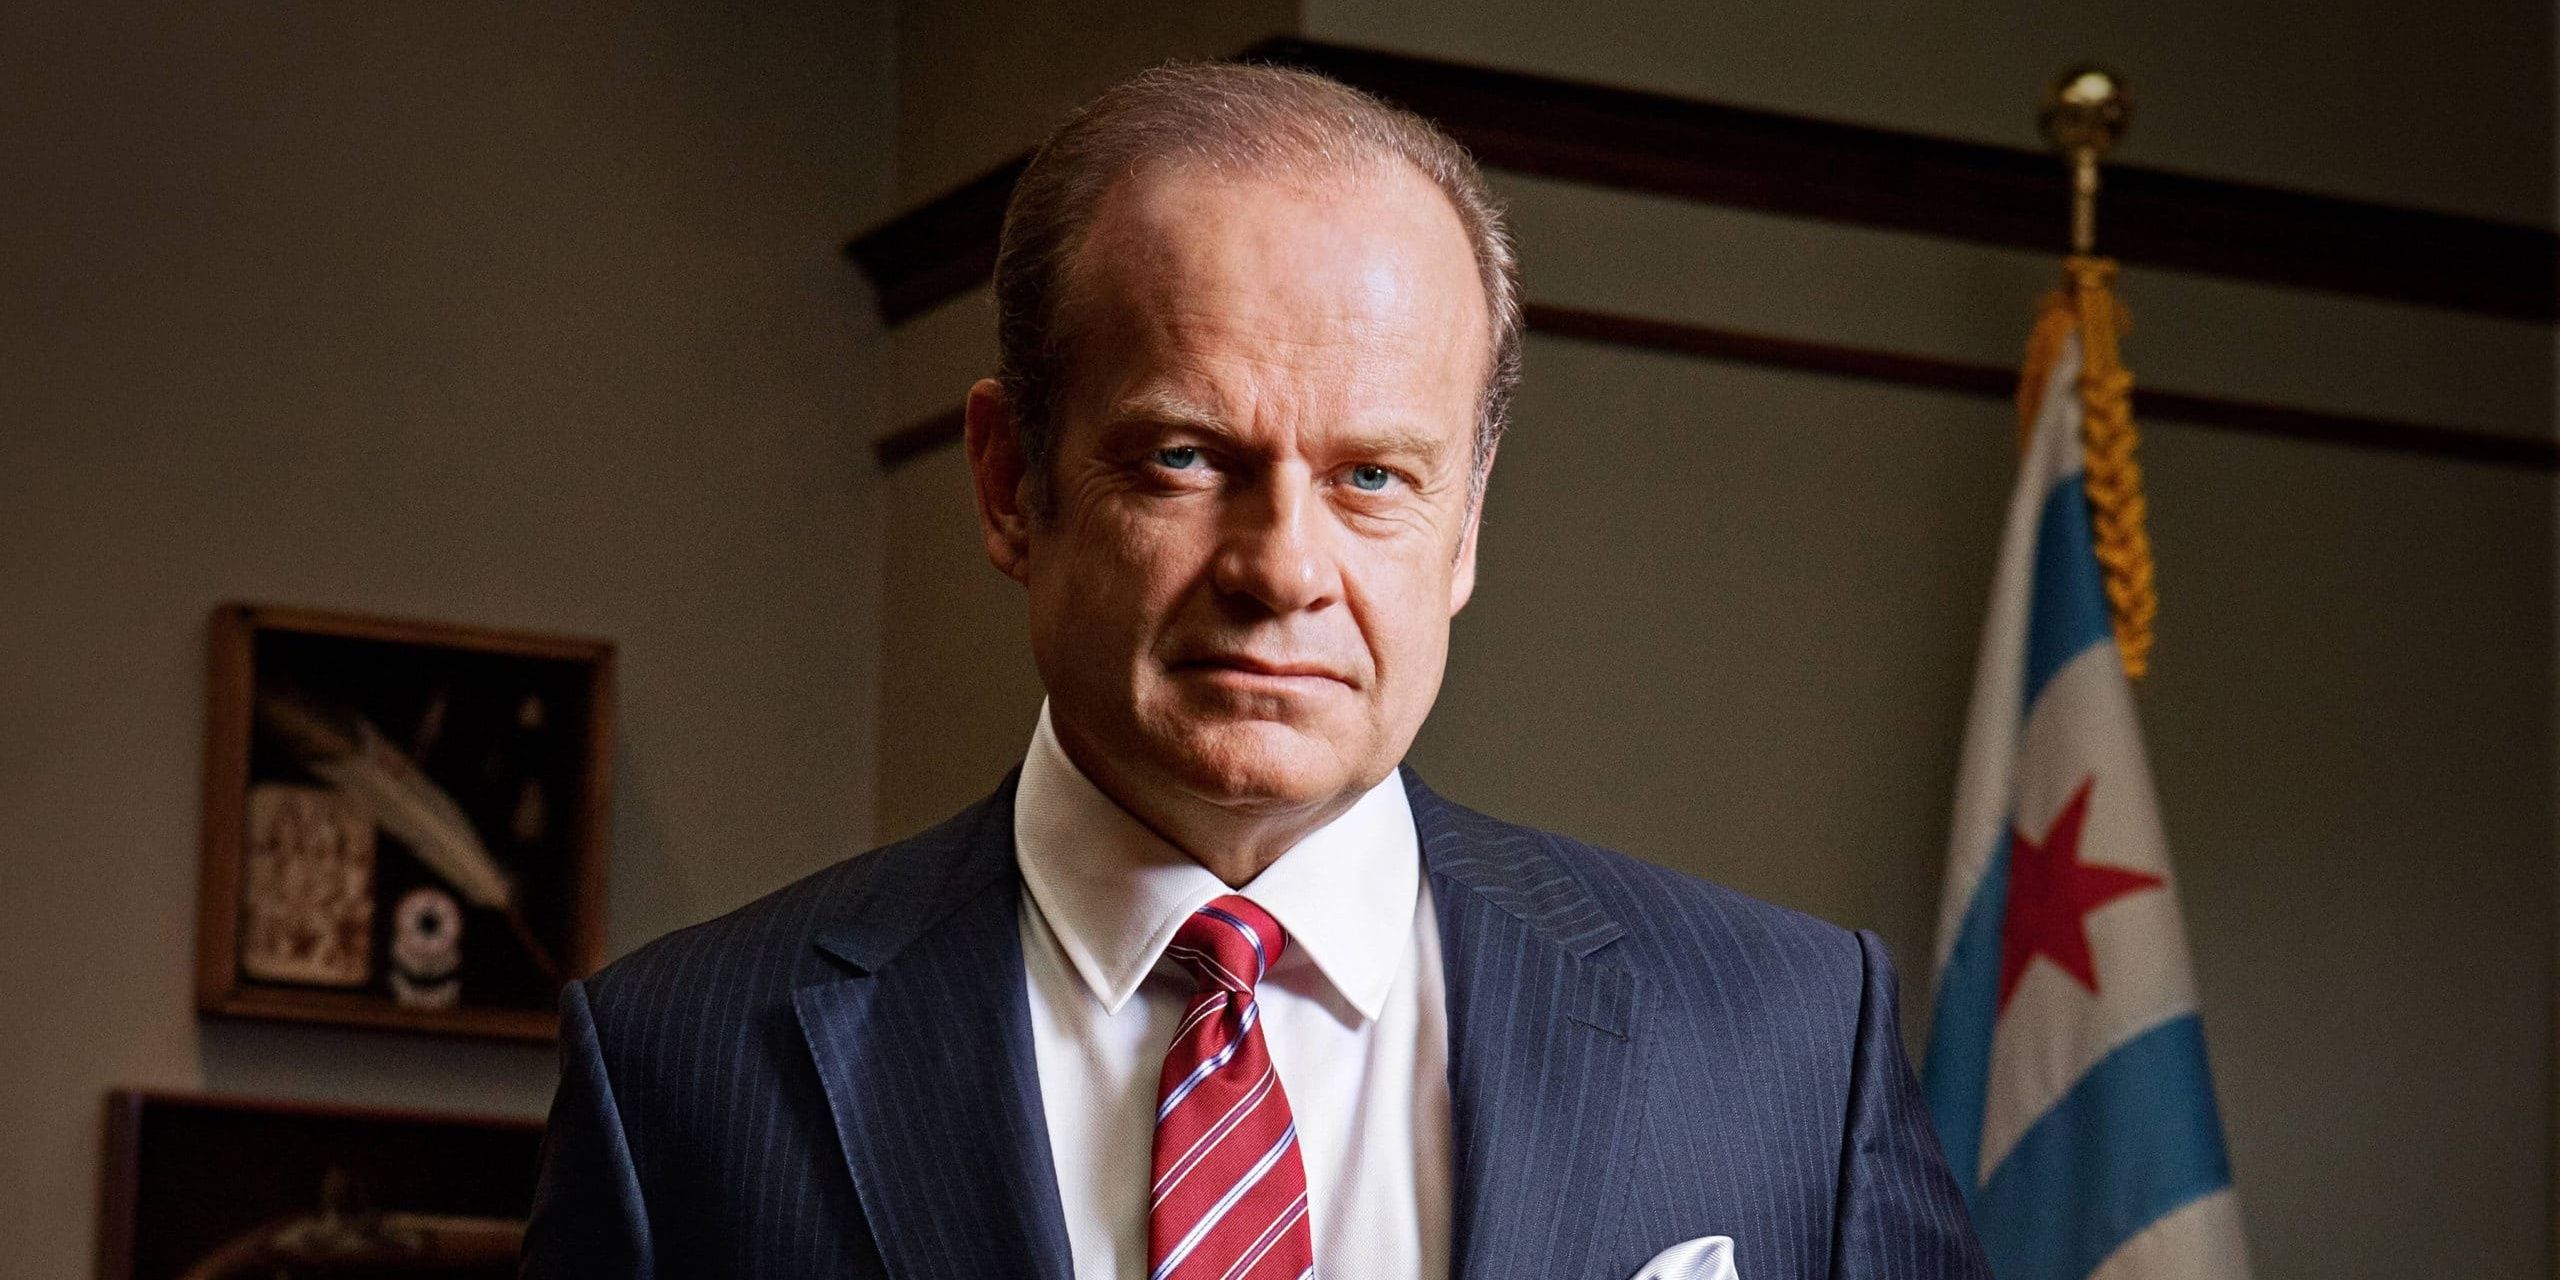 Kelsey Grammer stands in an office in a promotional image for Boss